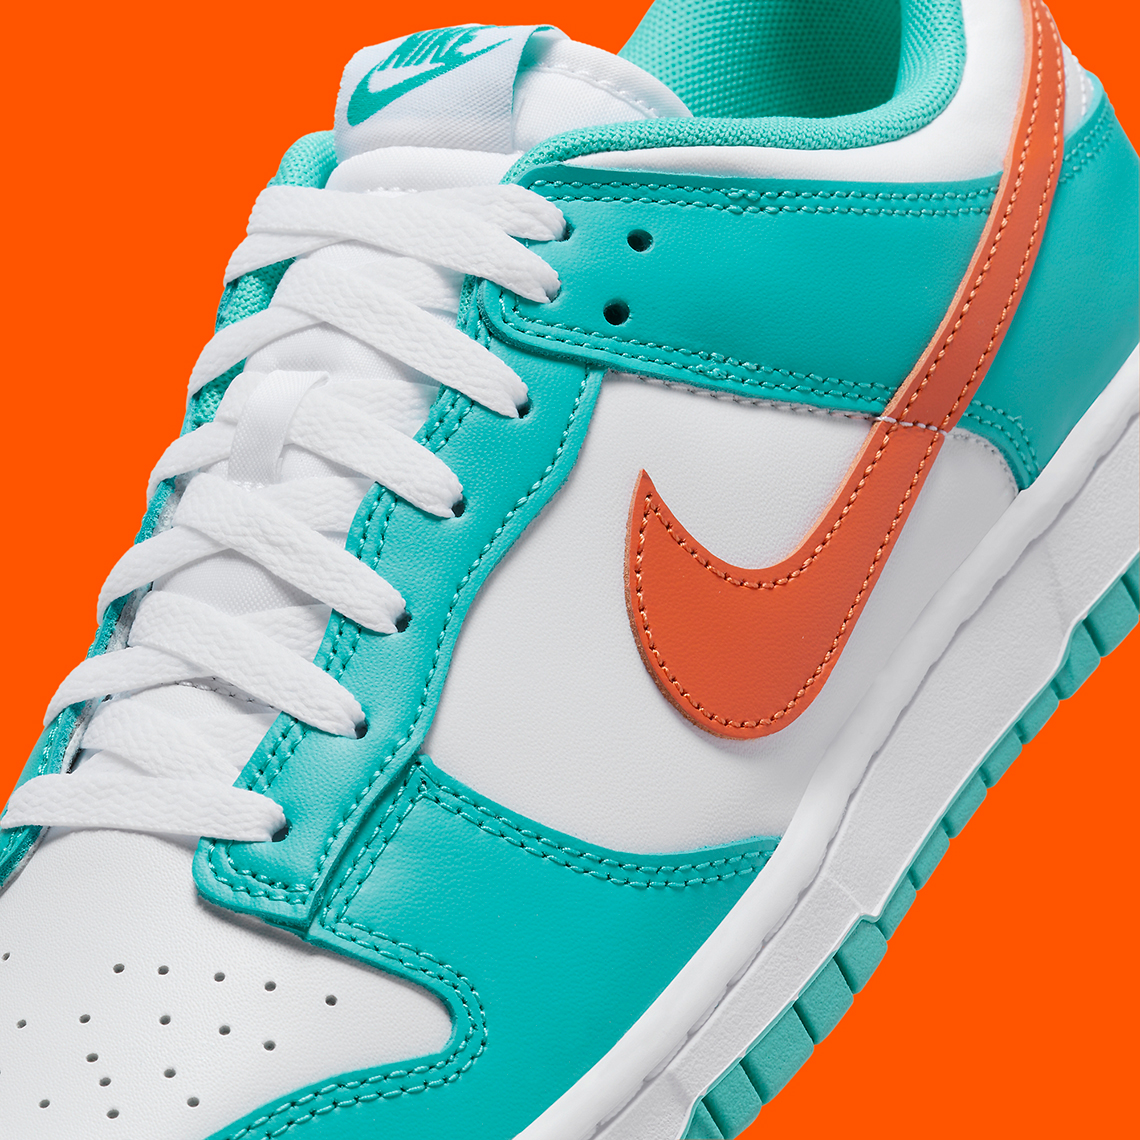 University Gold Gives The Nike Plus A Sweet Look Dolphins Dv0833 102 Release Date 4